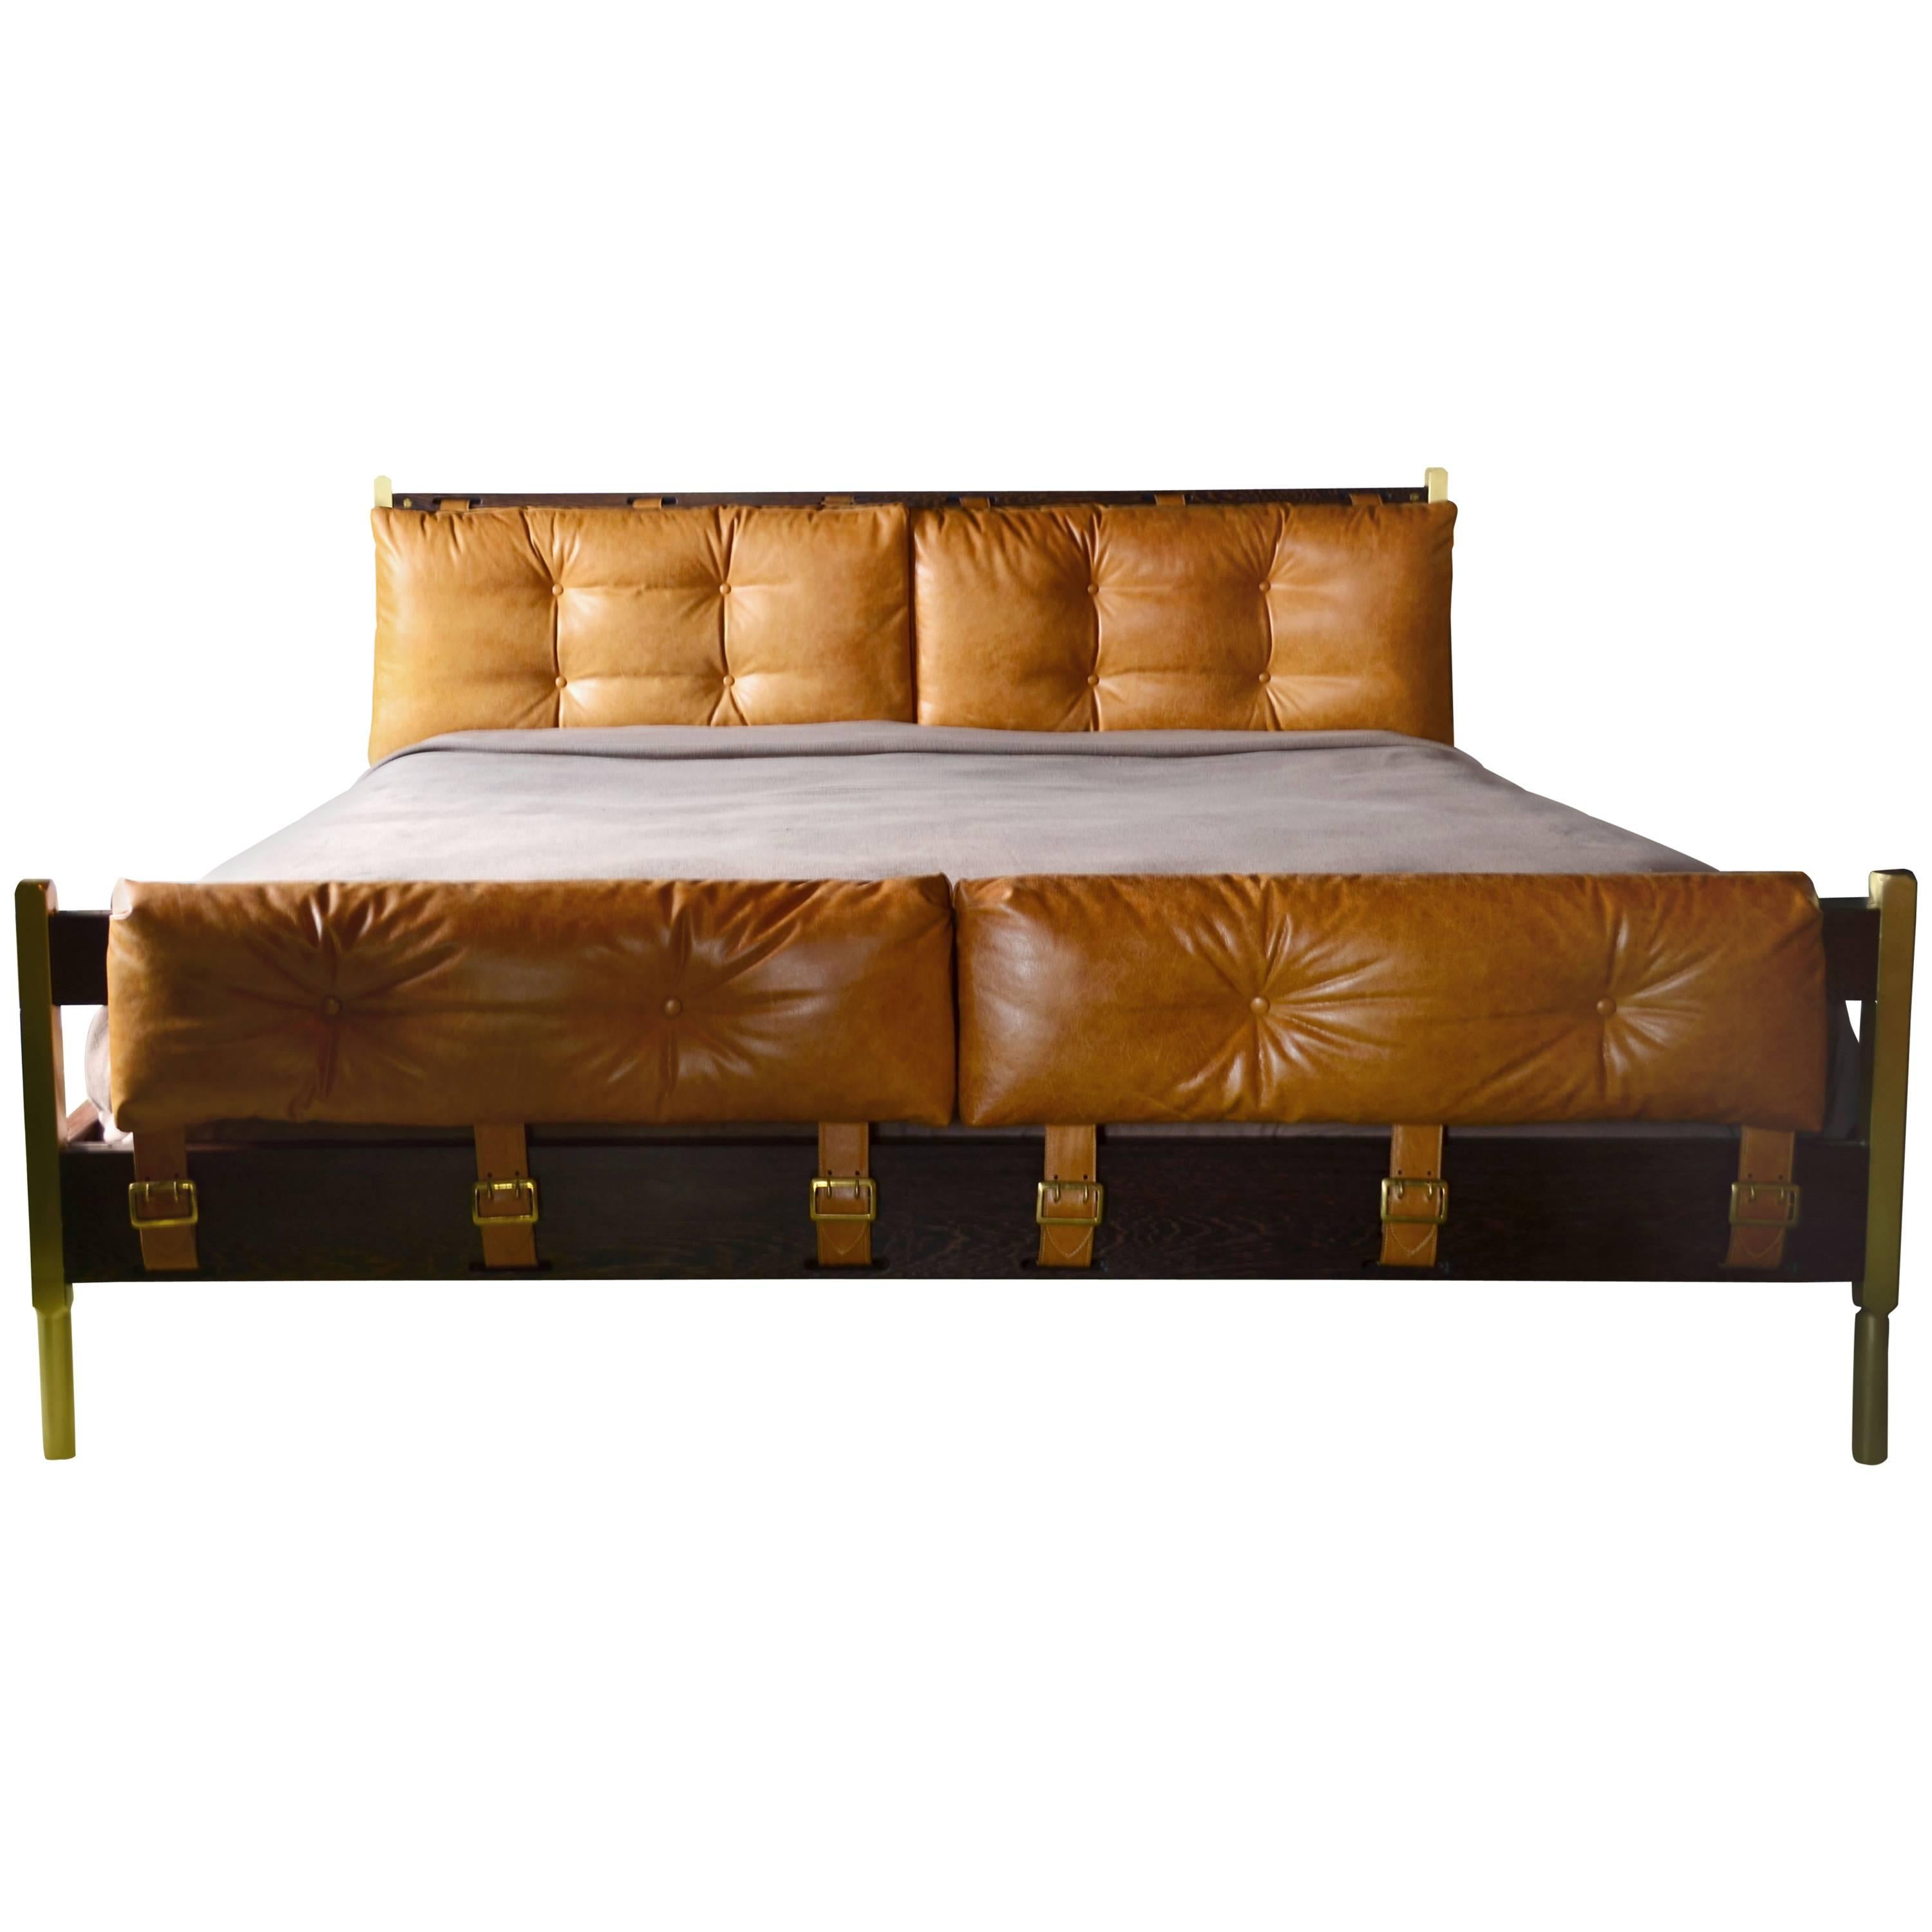 Brazilian Mid-Century Modern Inspired Campanha Bed with Brass and Leather Detail For Sale